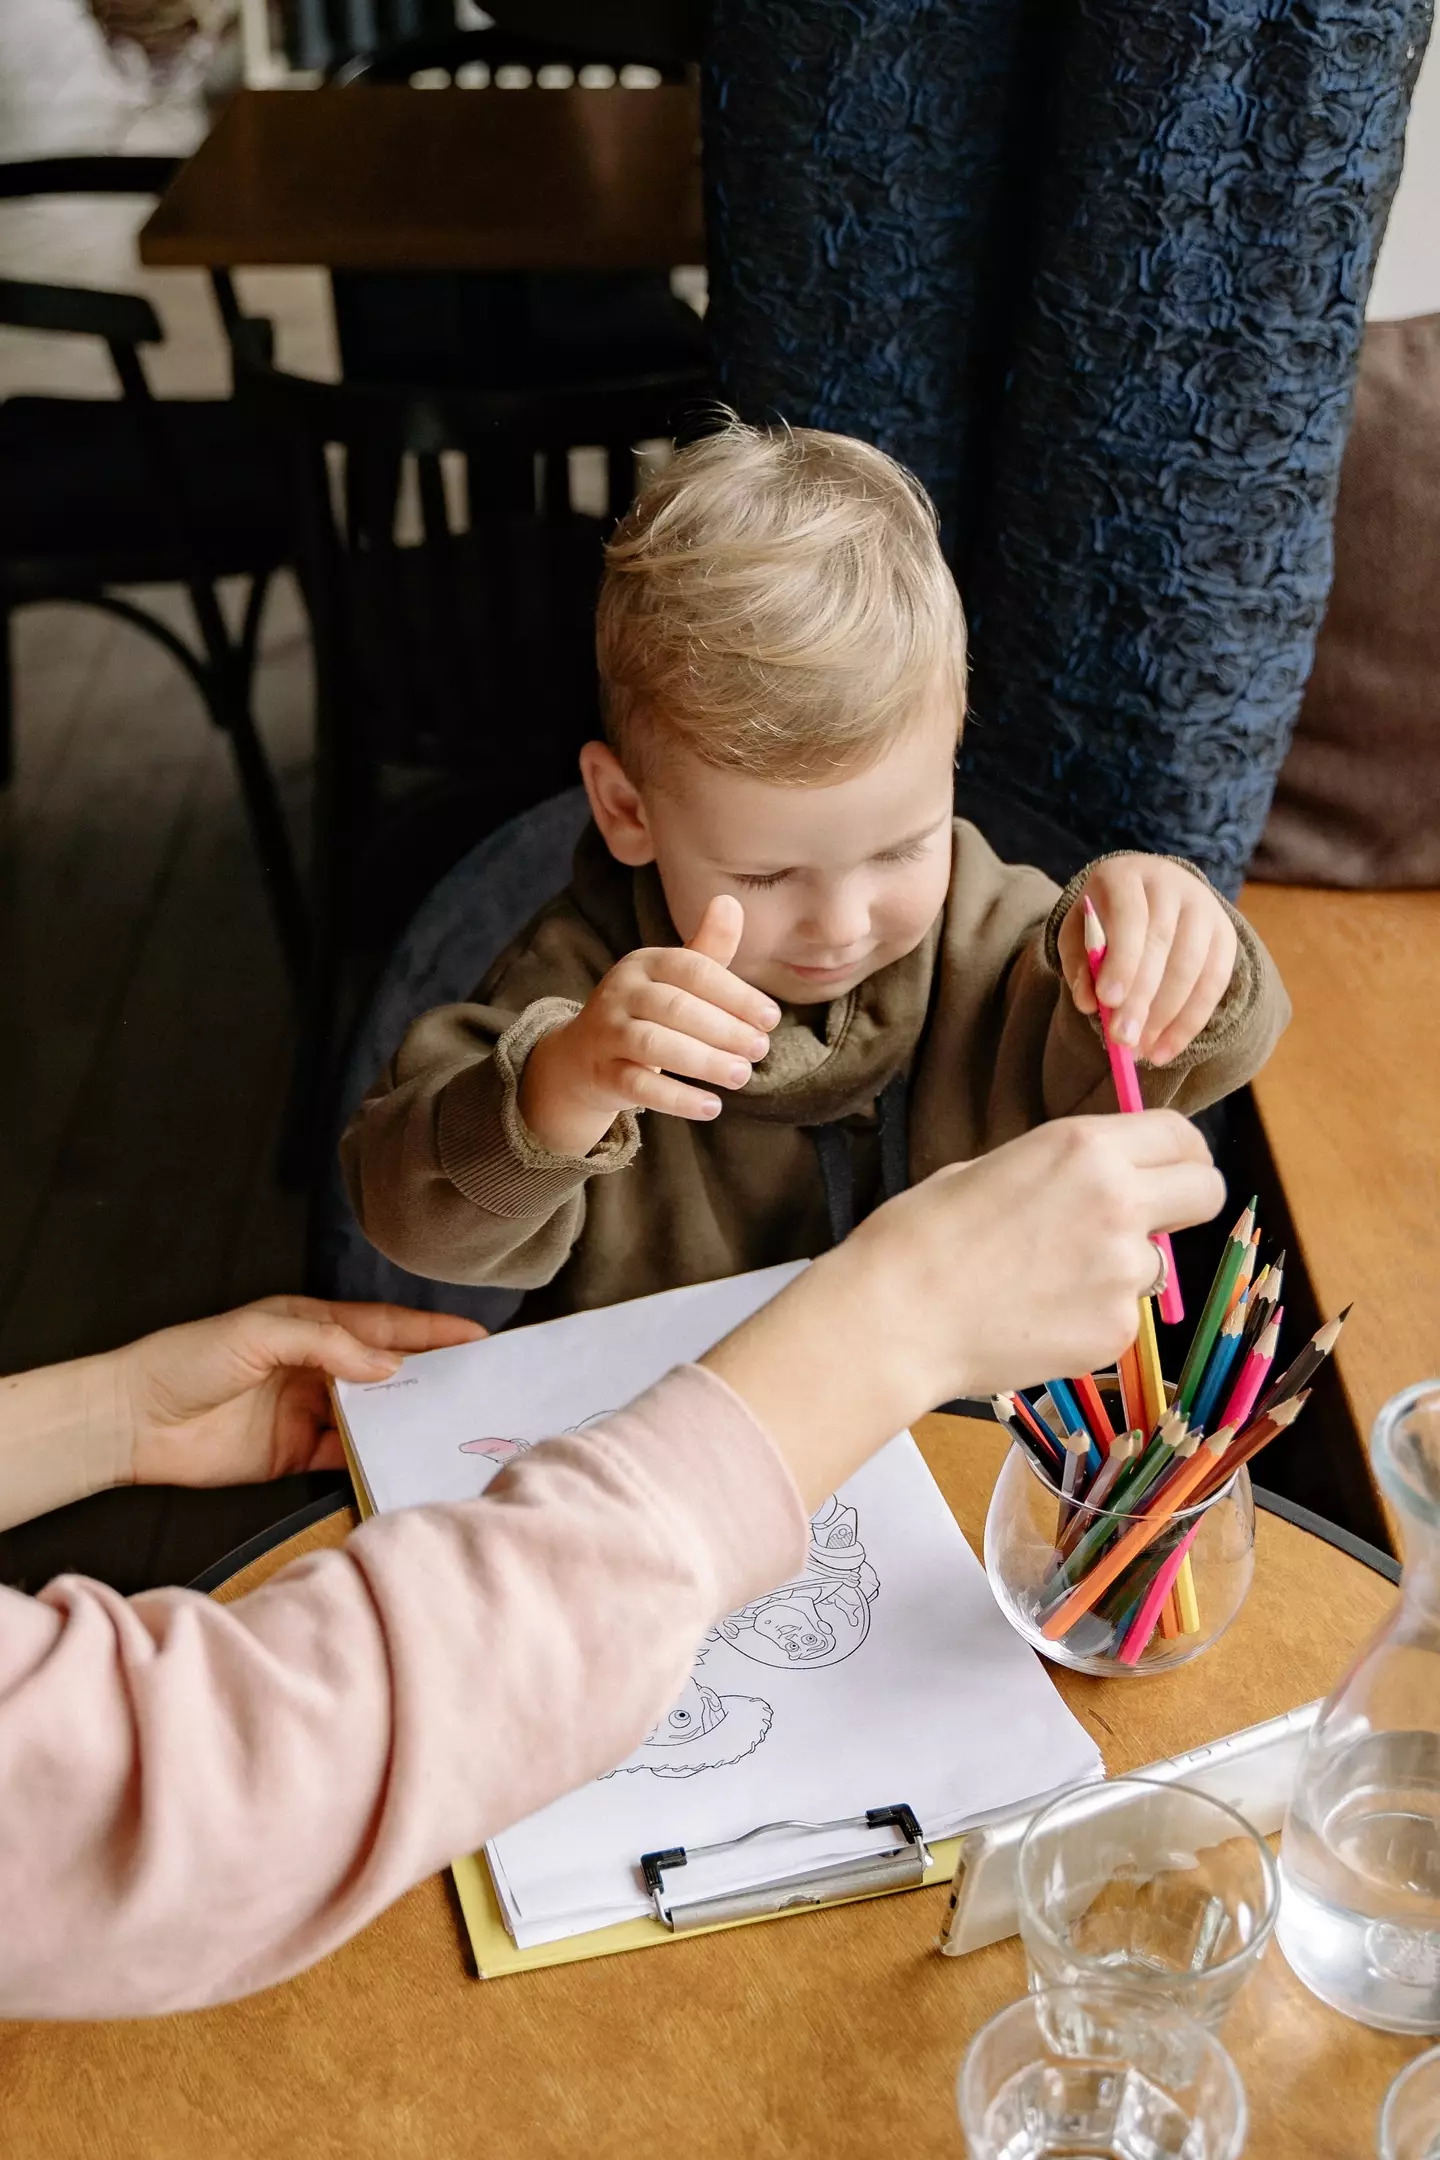 The mum was 'told off' after leaving her son at the table (stock image).